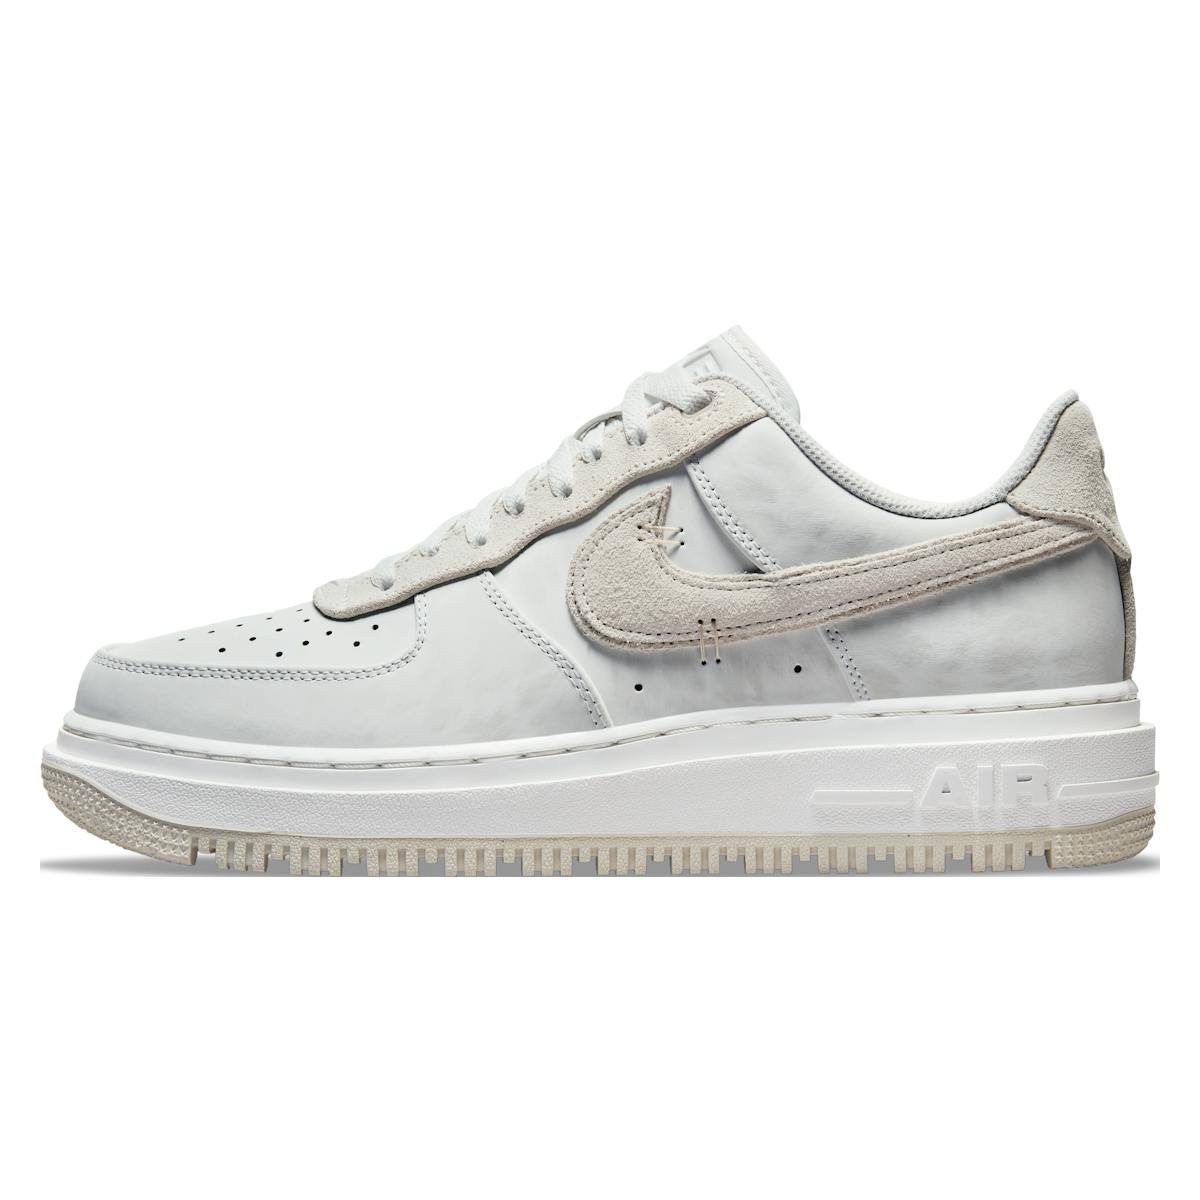 Nike Air Force 1 Luxe "Summit White"